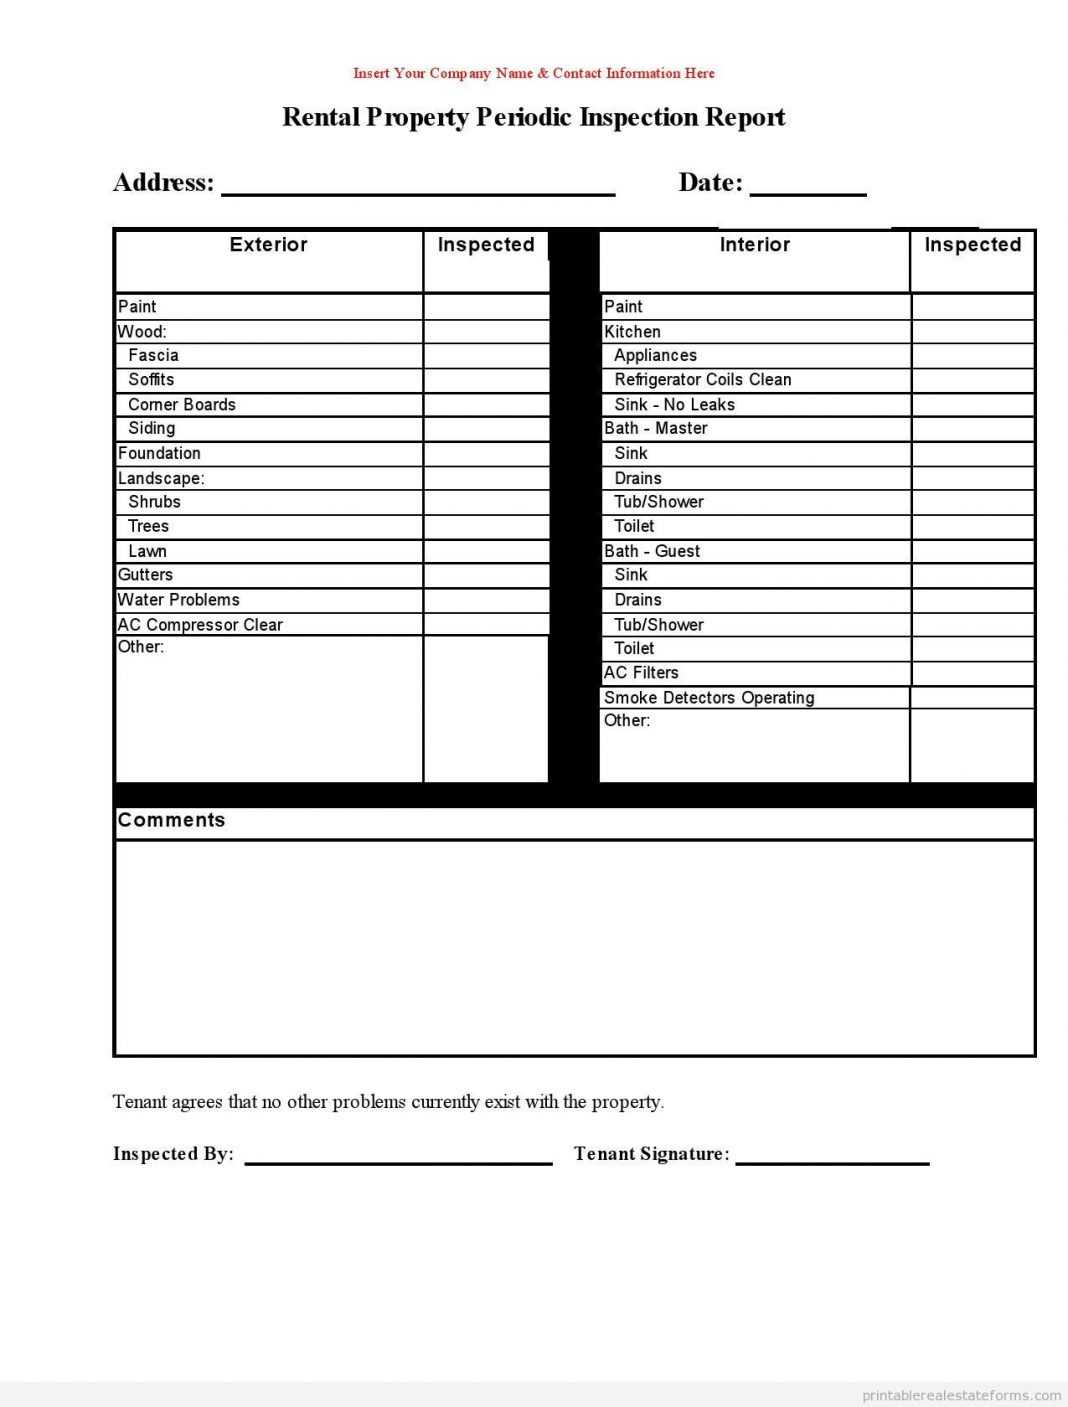 Inspection Rt Template Home Build Your Own Version Top Excel With Home Inspection Report Template Free